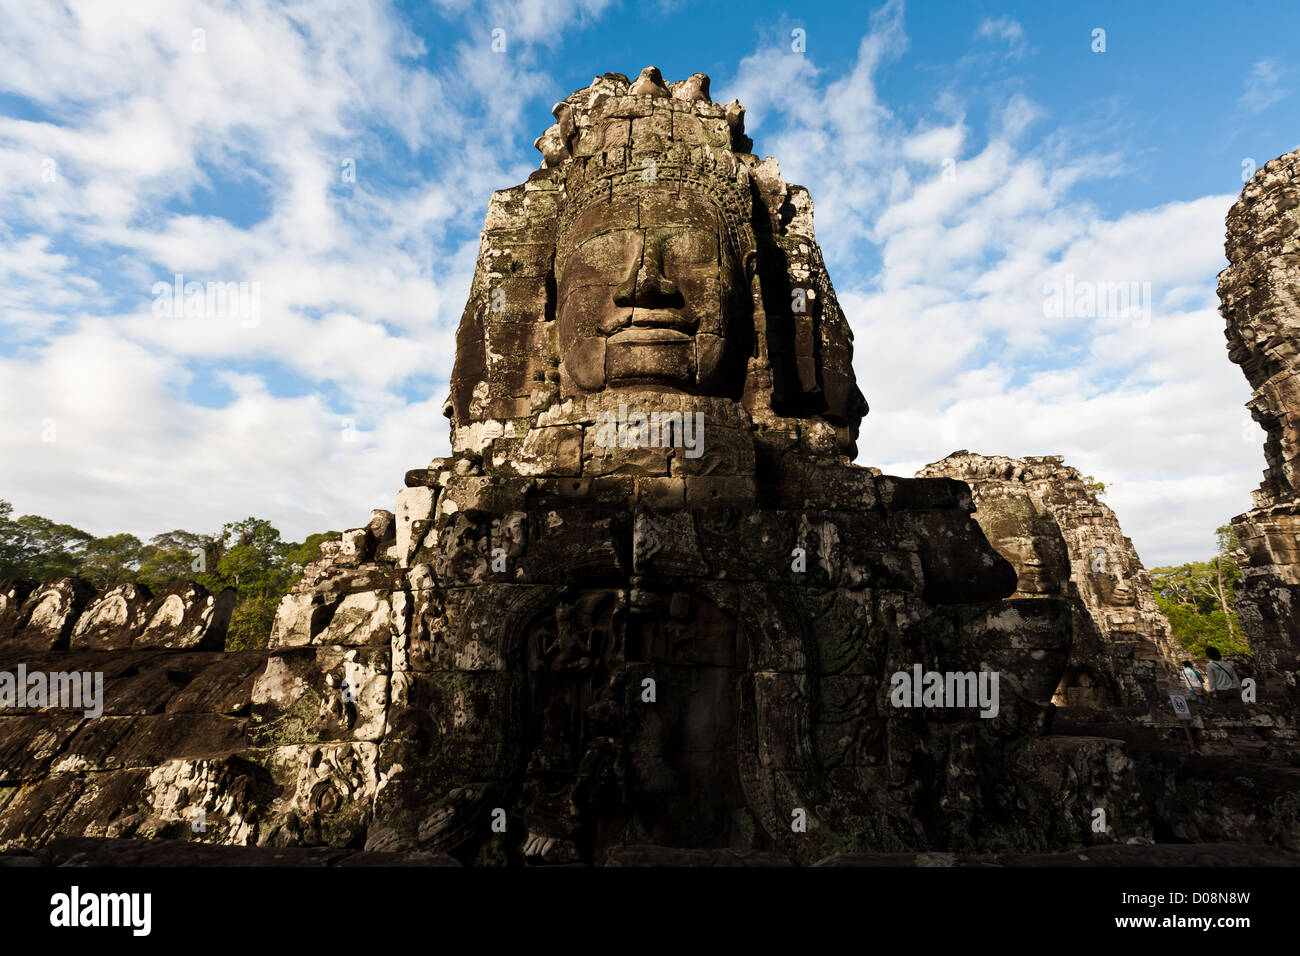 Famous carved stone head statue of ancient Prasat Bayon temple in UNESCO World Heritage SIte at Angkor Wat, SIEM REAP, CAMBODIA Stock Photo